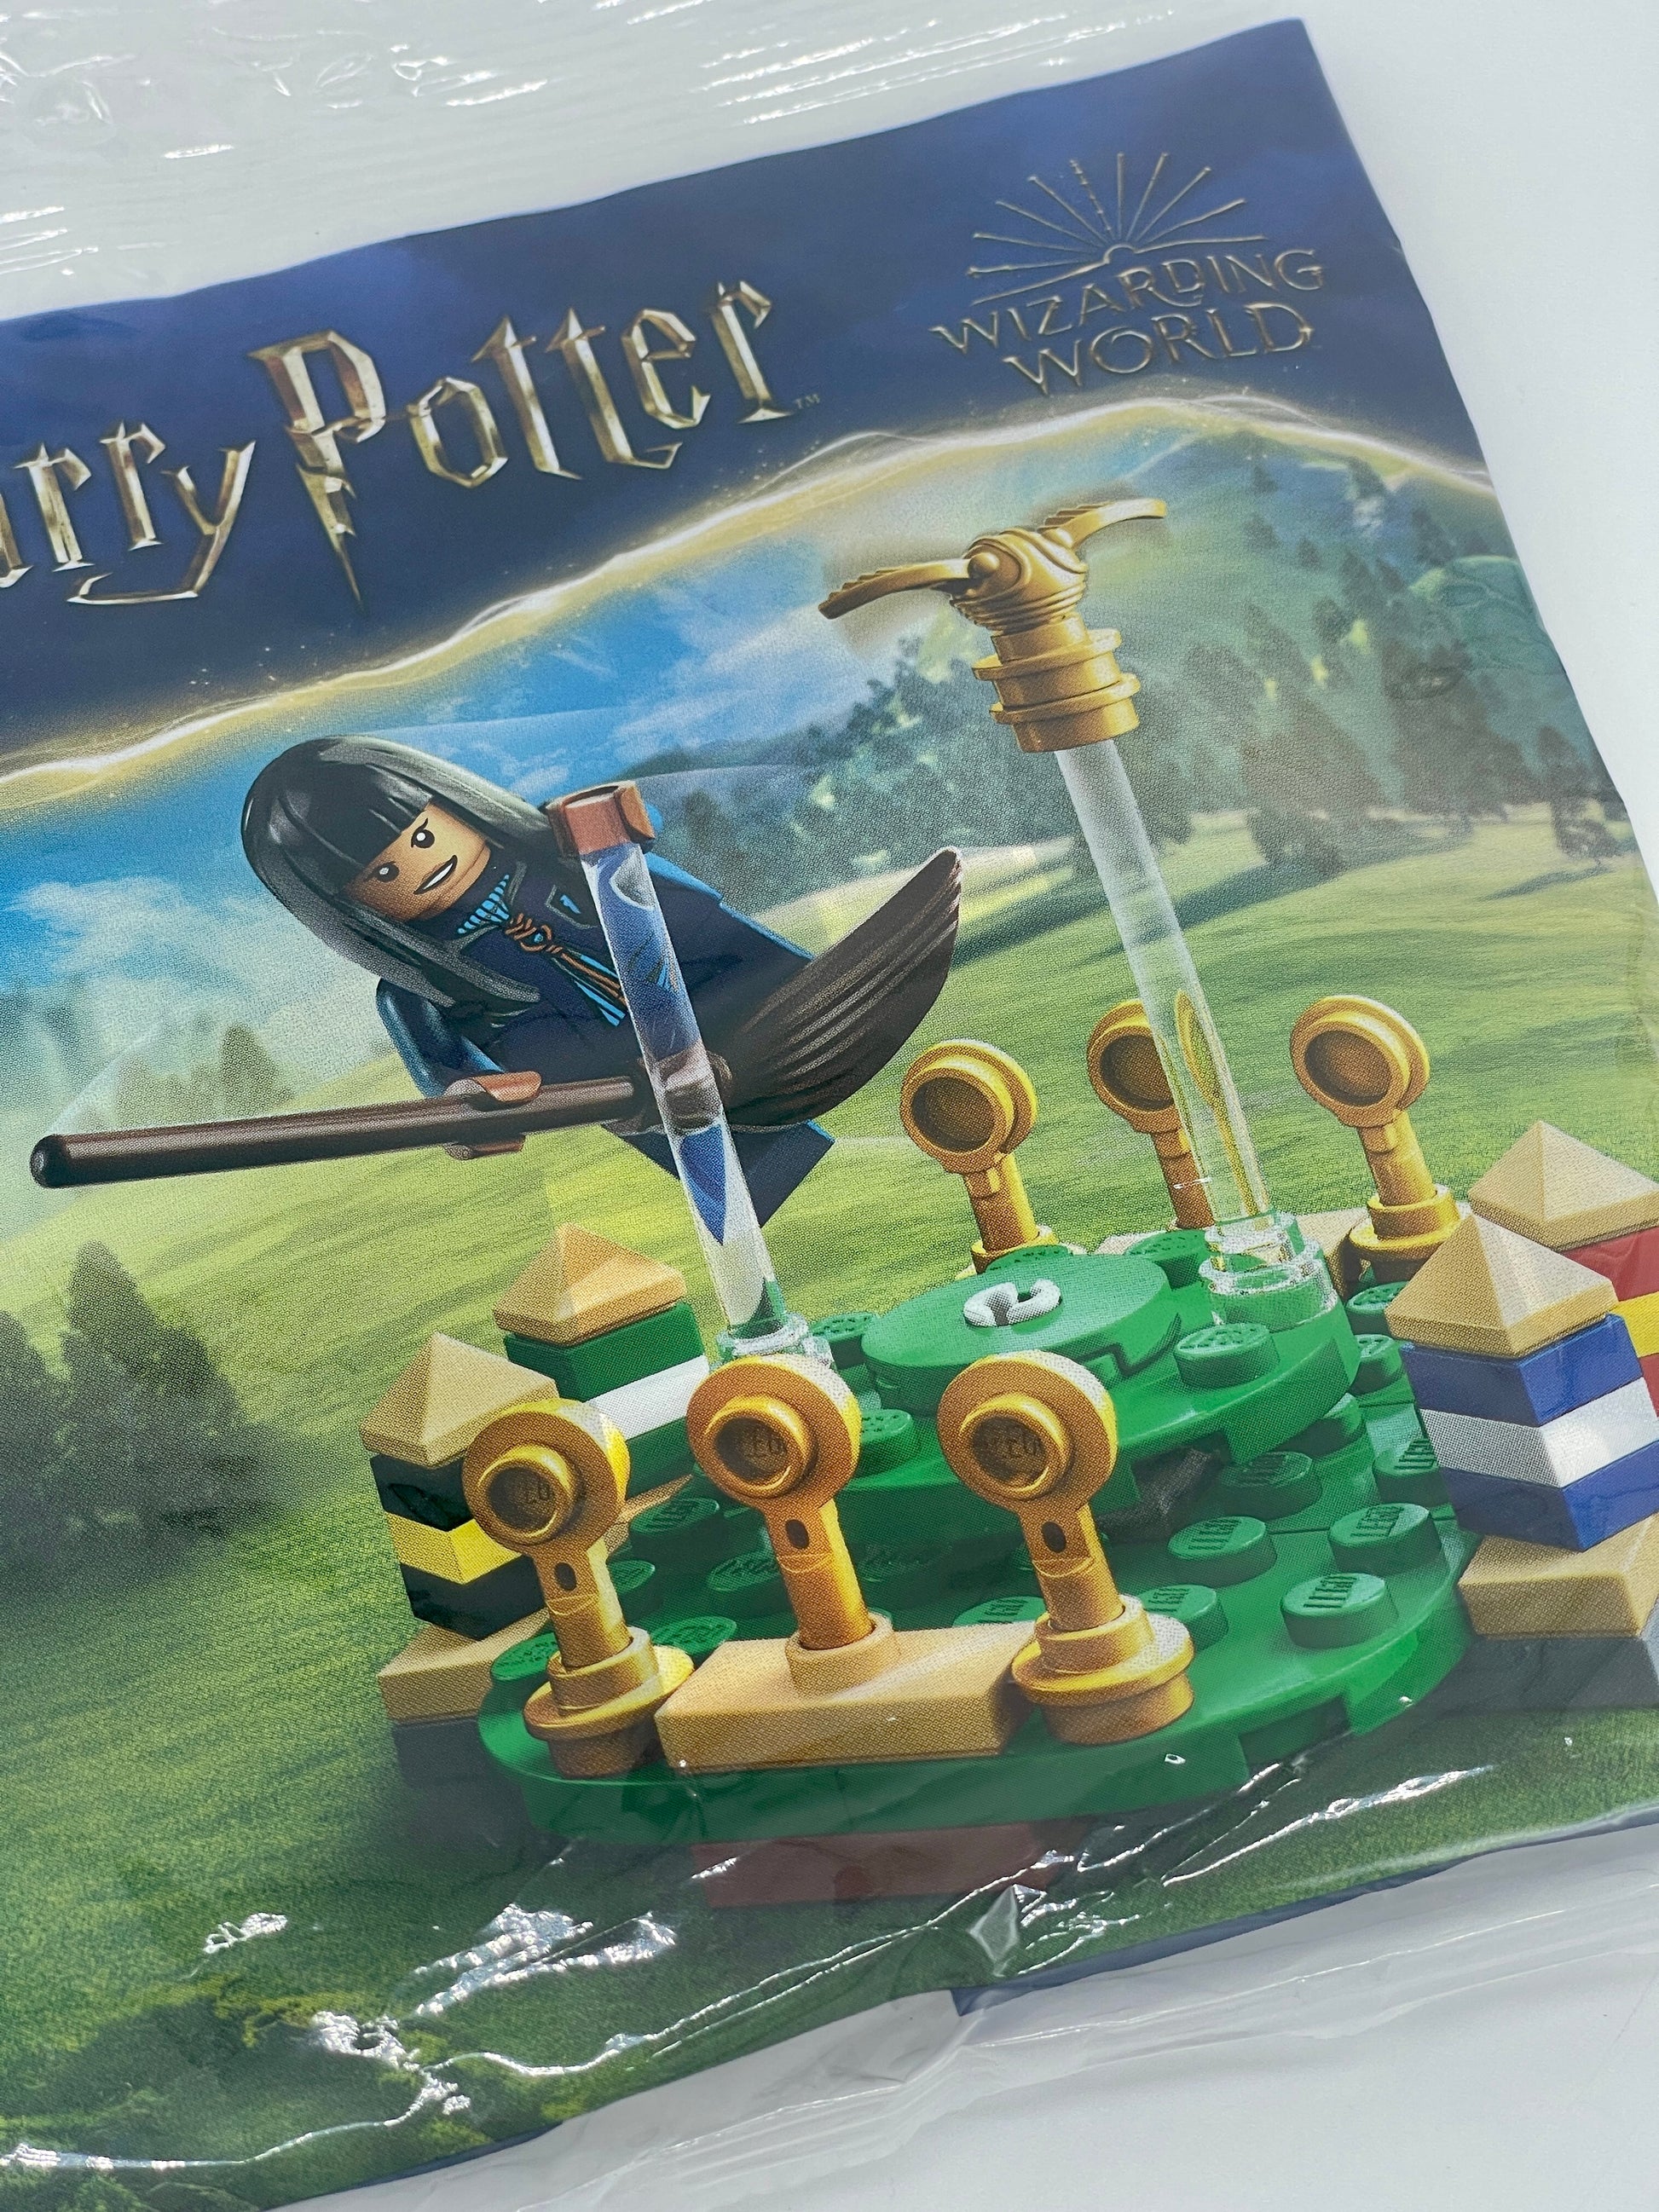 LEGO Harry Potter Quidditch Practice 30651 Building Toy